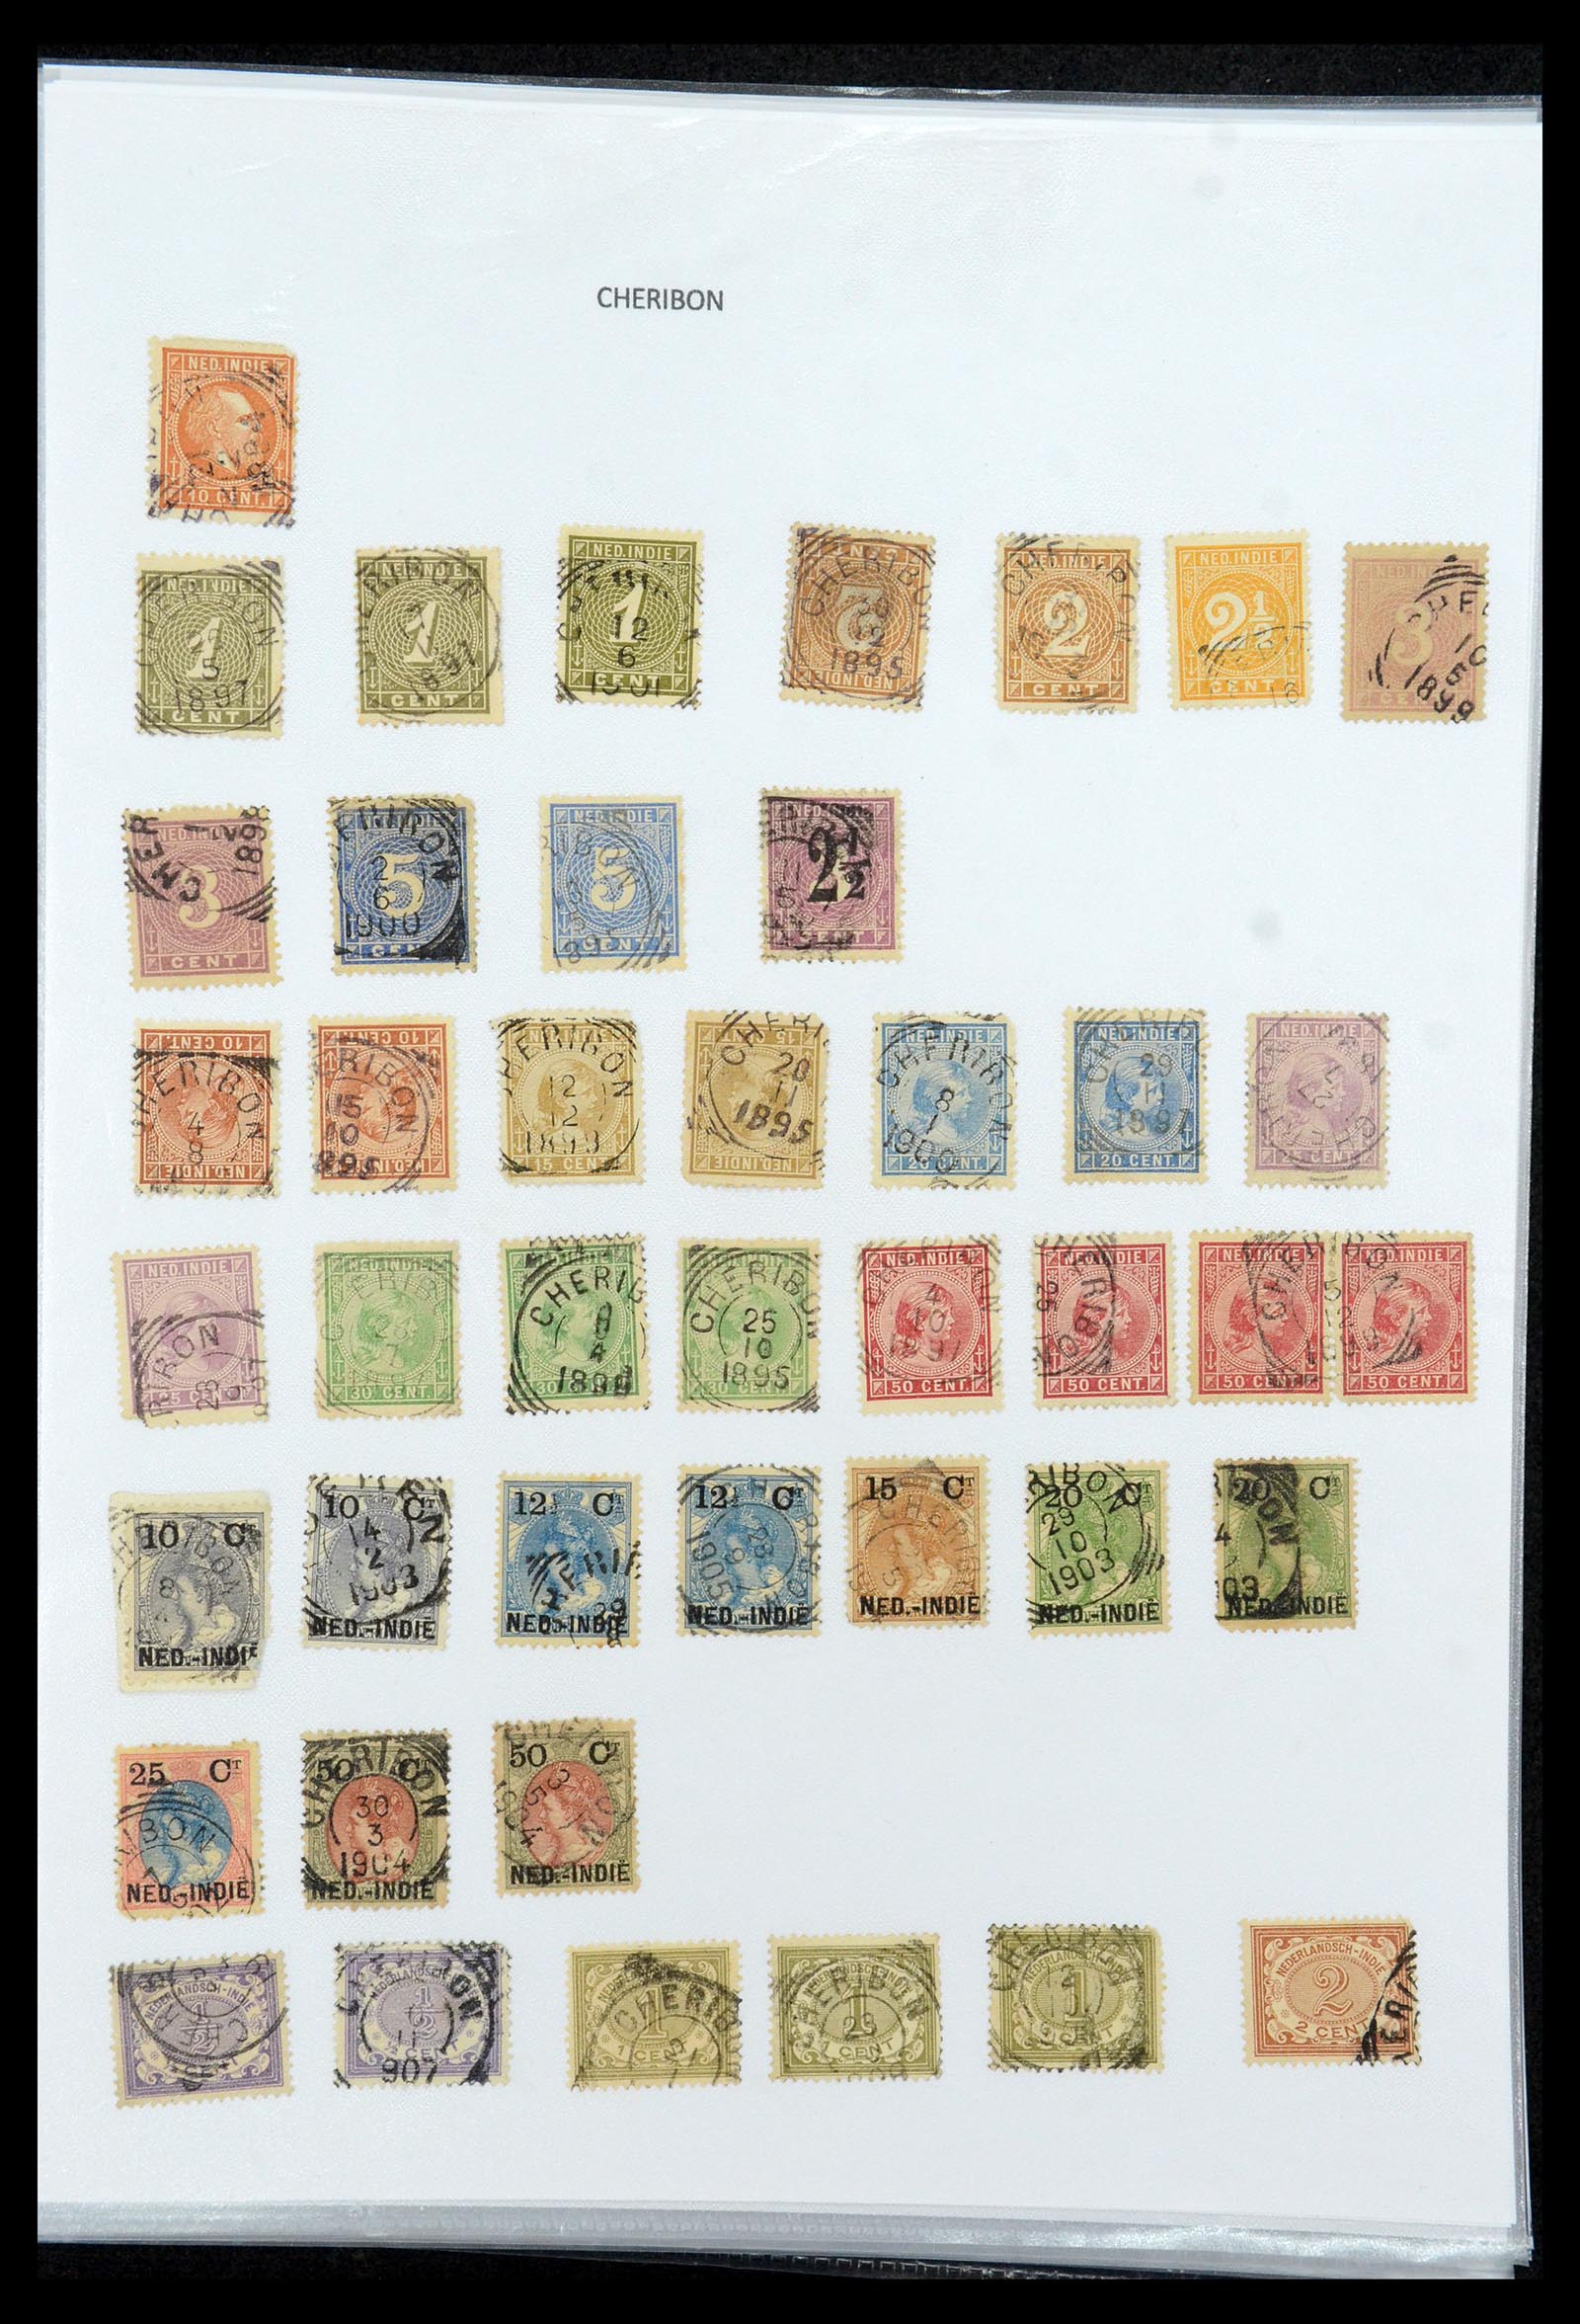 36432 040 - Stamp collection 36432 Dutch east Indies square cancels.